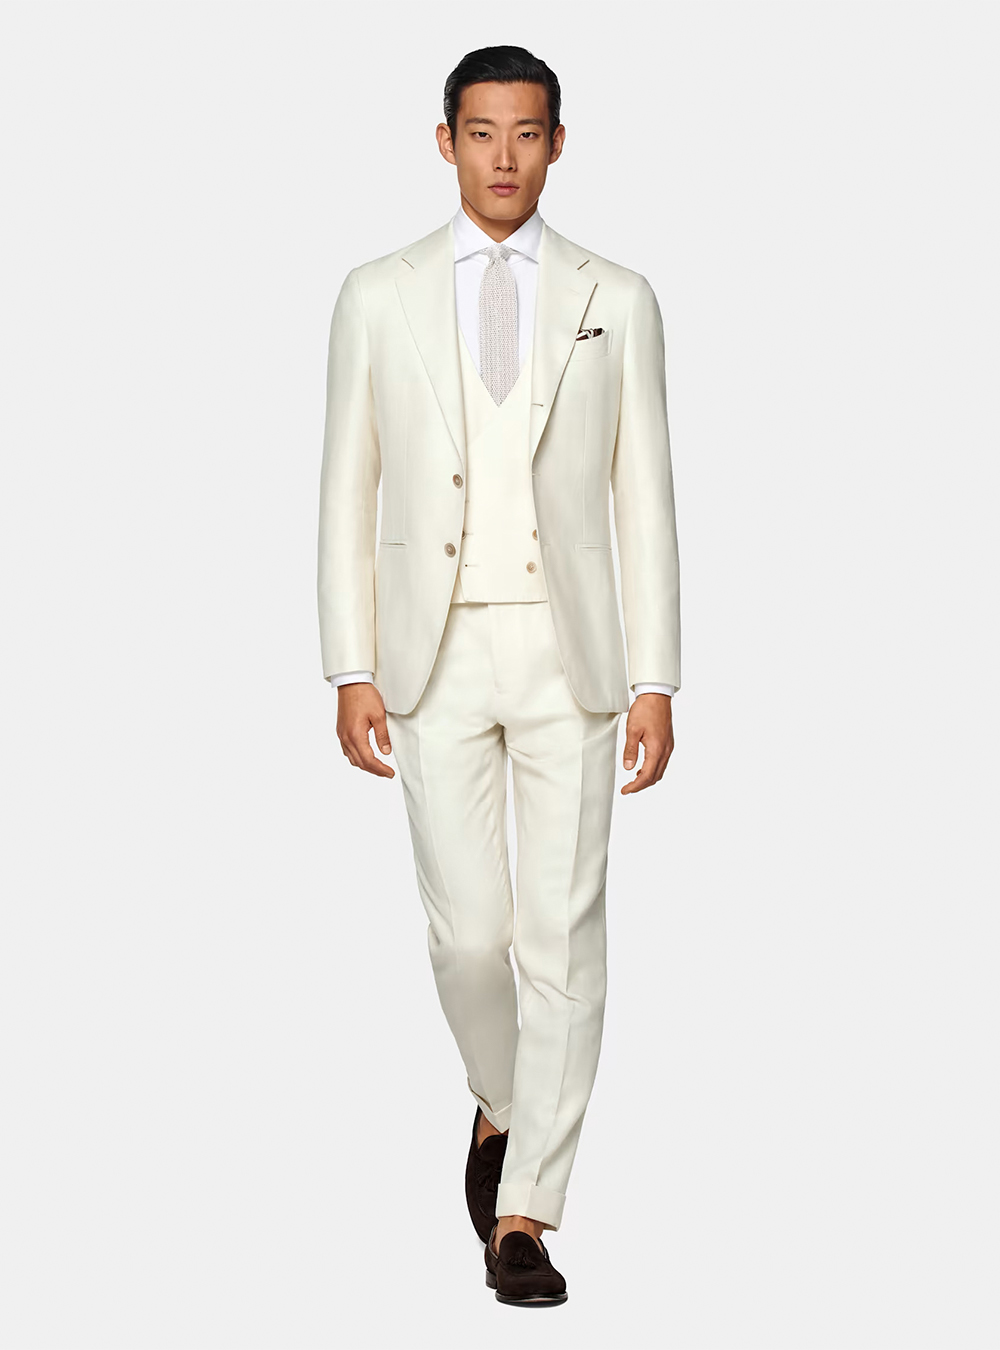 white suit, white vest, white dress shirt, and brown loafers